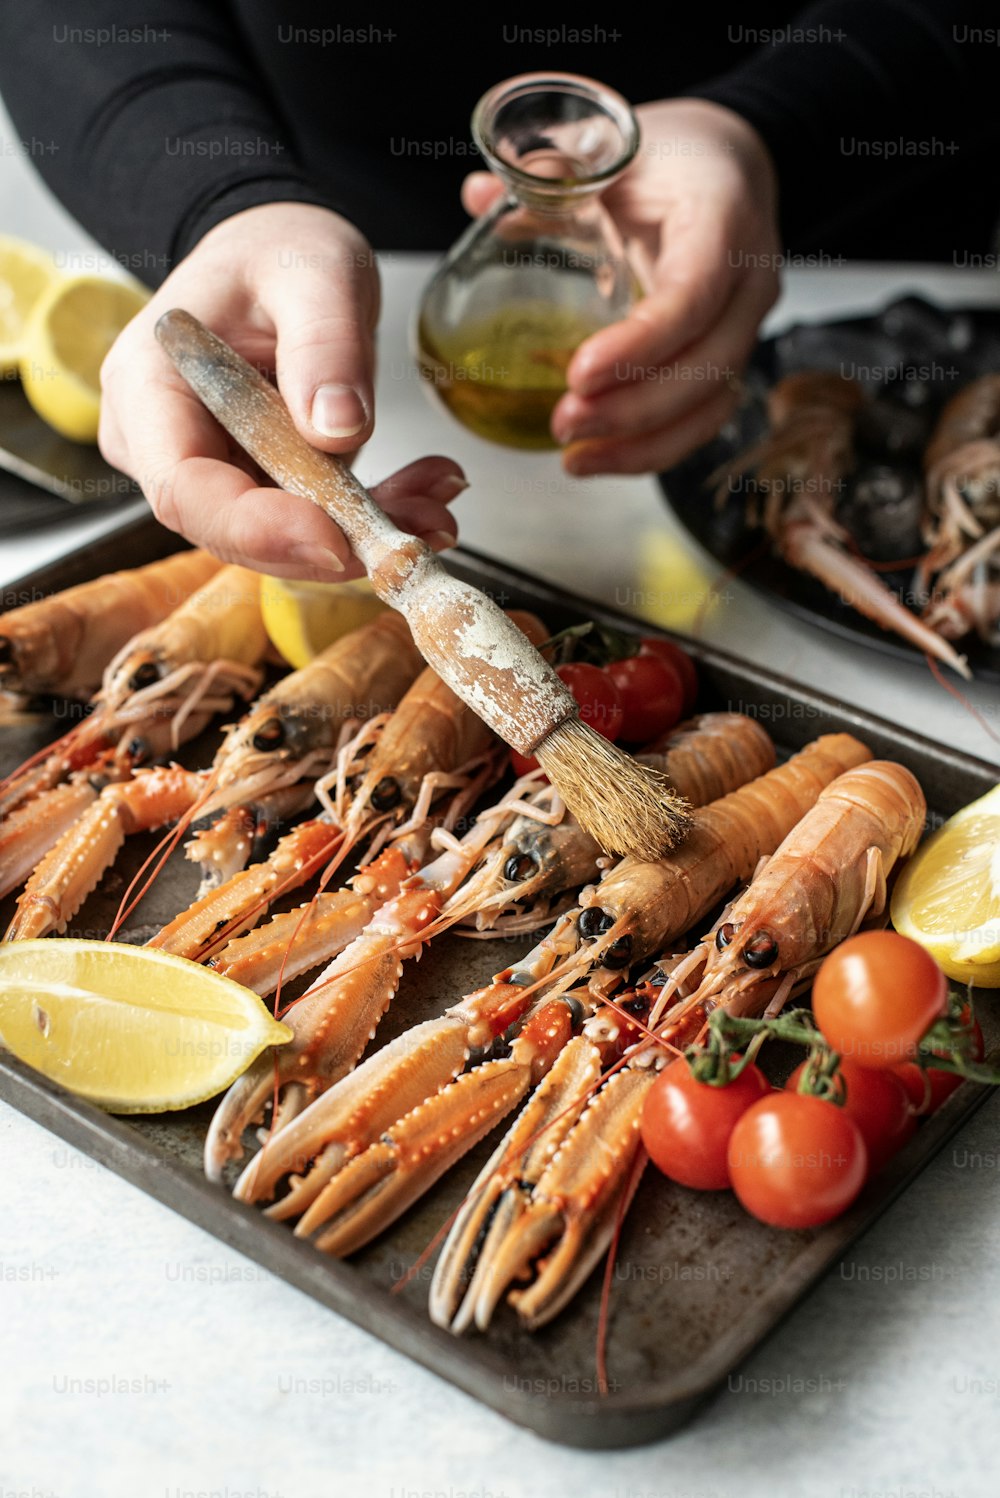 a person is holding a spoon over a tray of lobsters